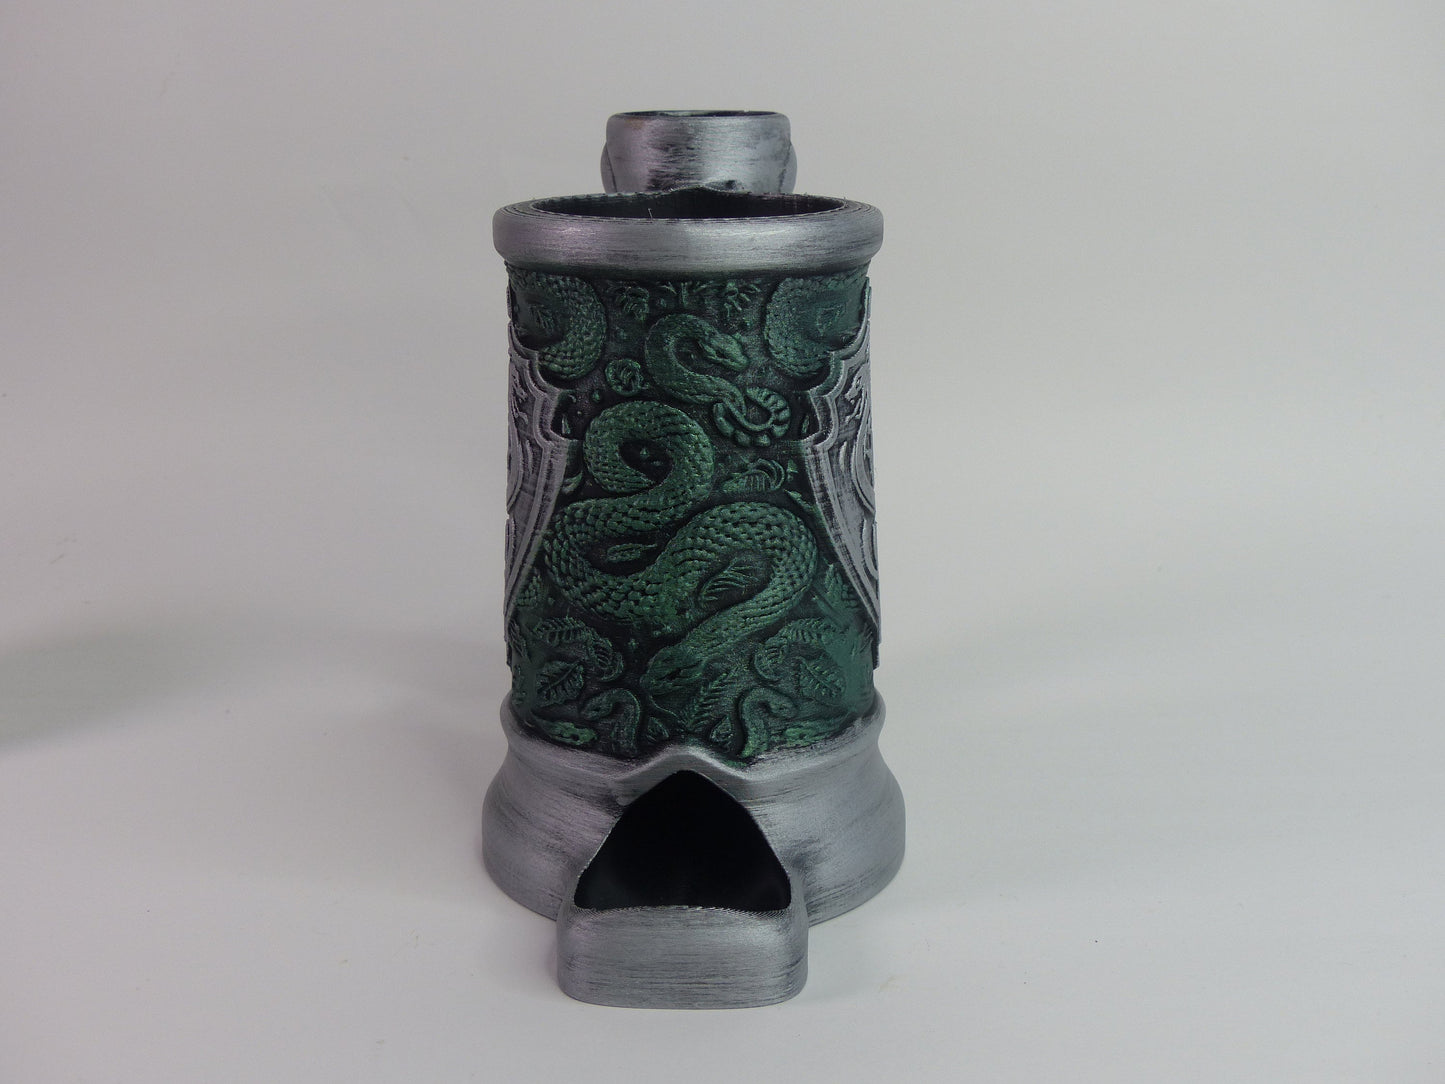 Snake Crest Can Cosy/Cozy DnD Dice Tower - 3D printed and hand painted - Can be personalised!